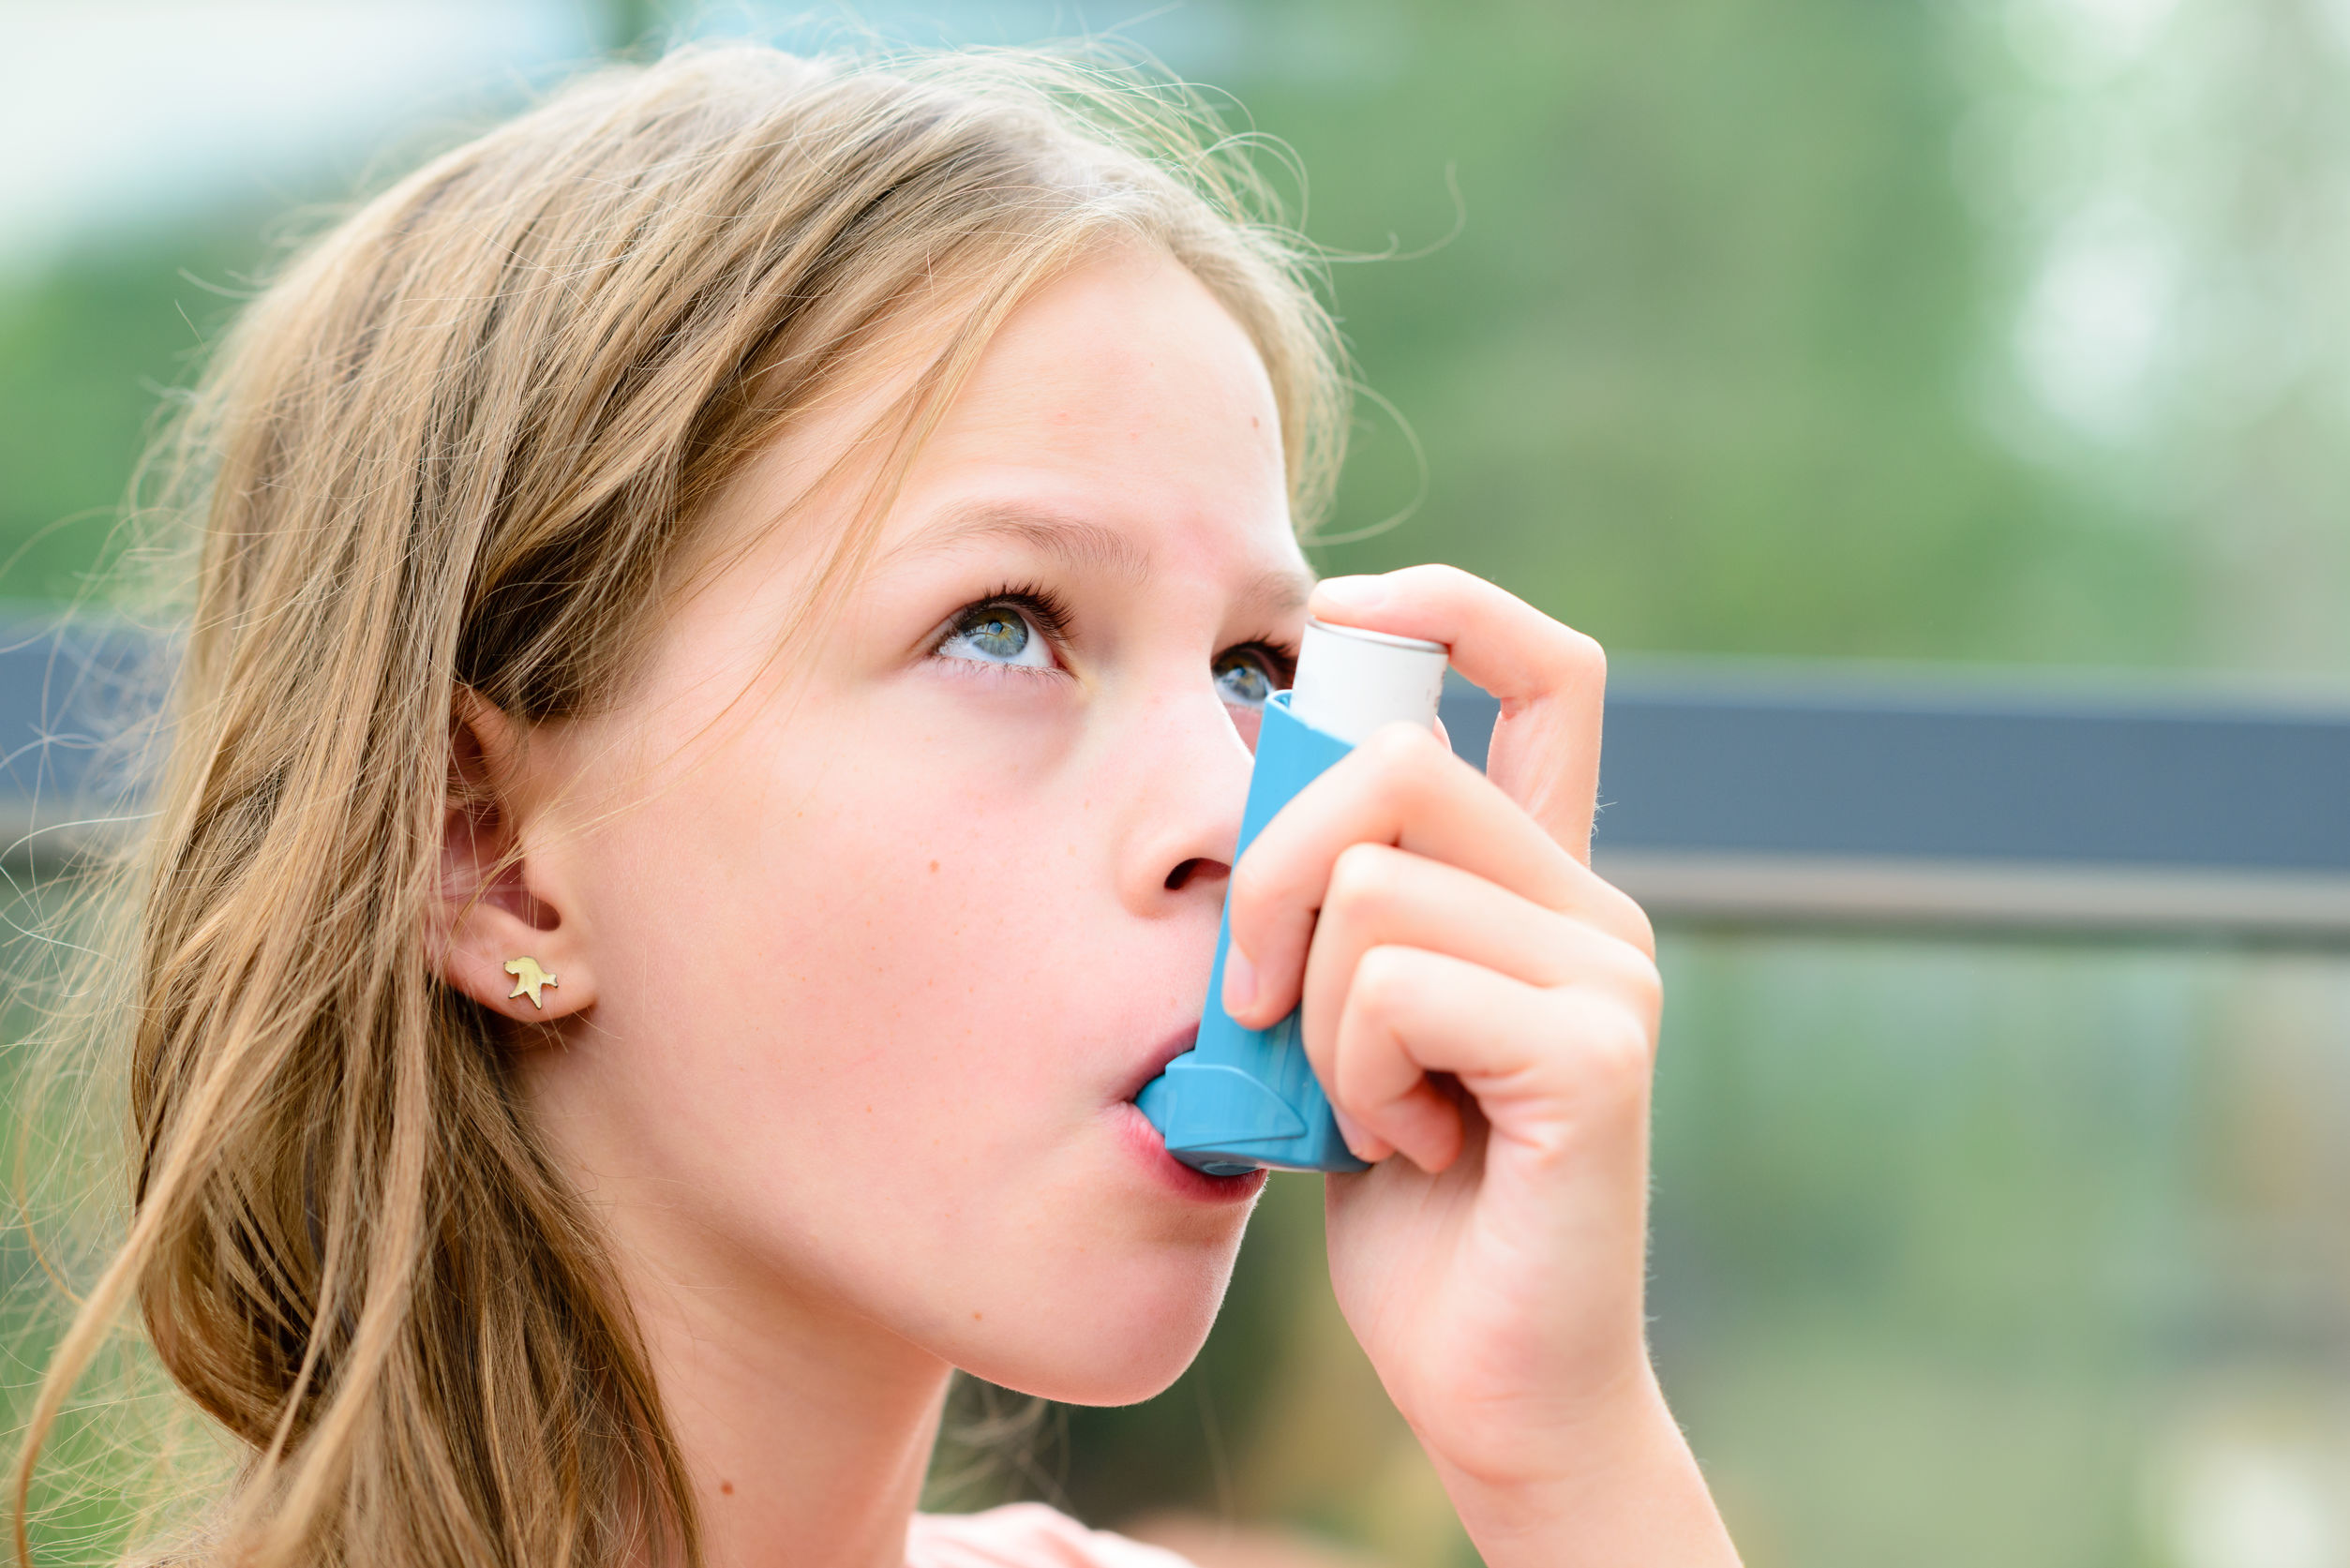 Girl having asthma using the asthma inhaler for being healthy - shallow depth of field - asthma allergy concept